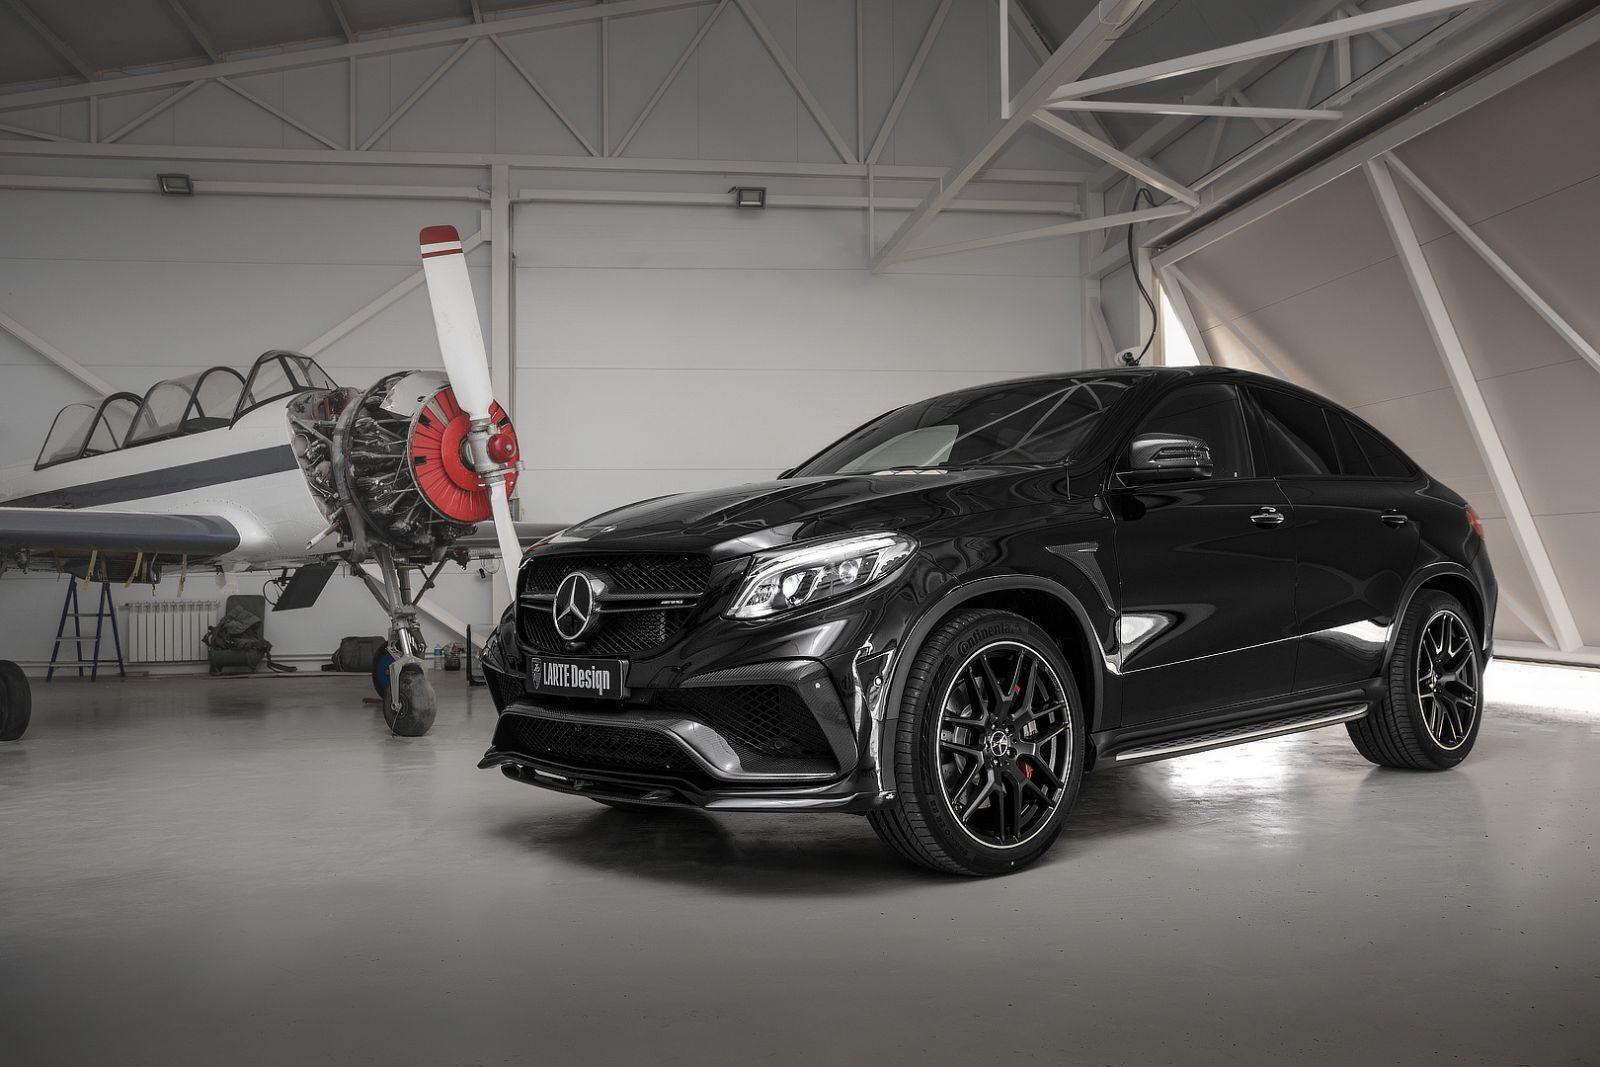 Mercedes-AMG GLE 63 S Coupe by Larte Design